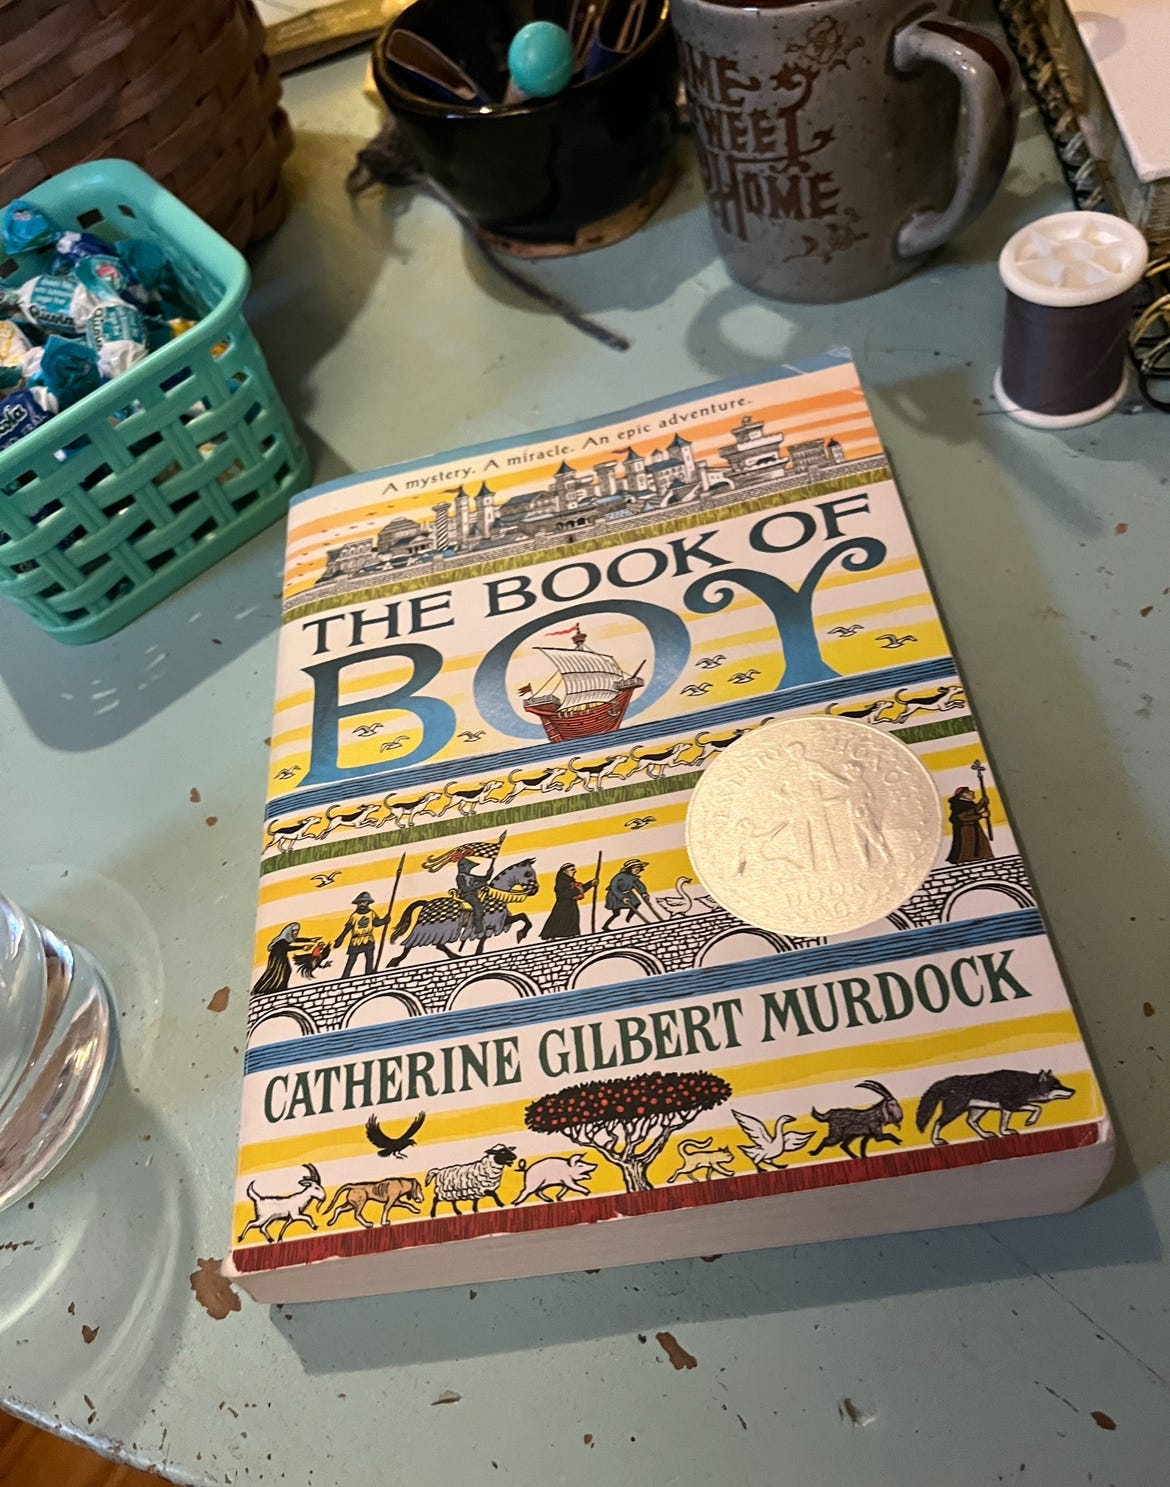 On my coffee table: The Book of Boy by Catherine Gilbert